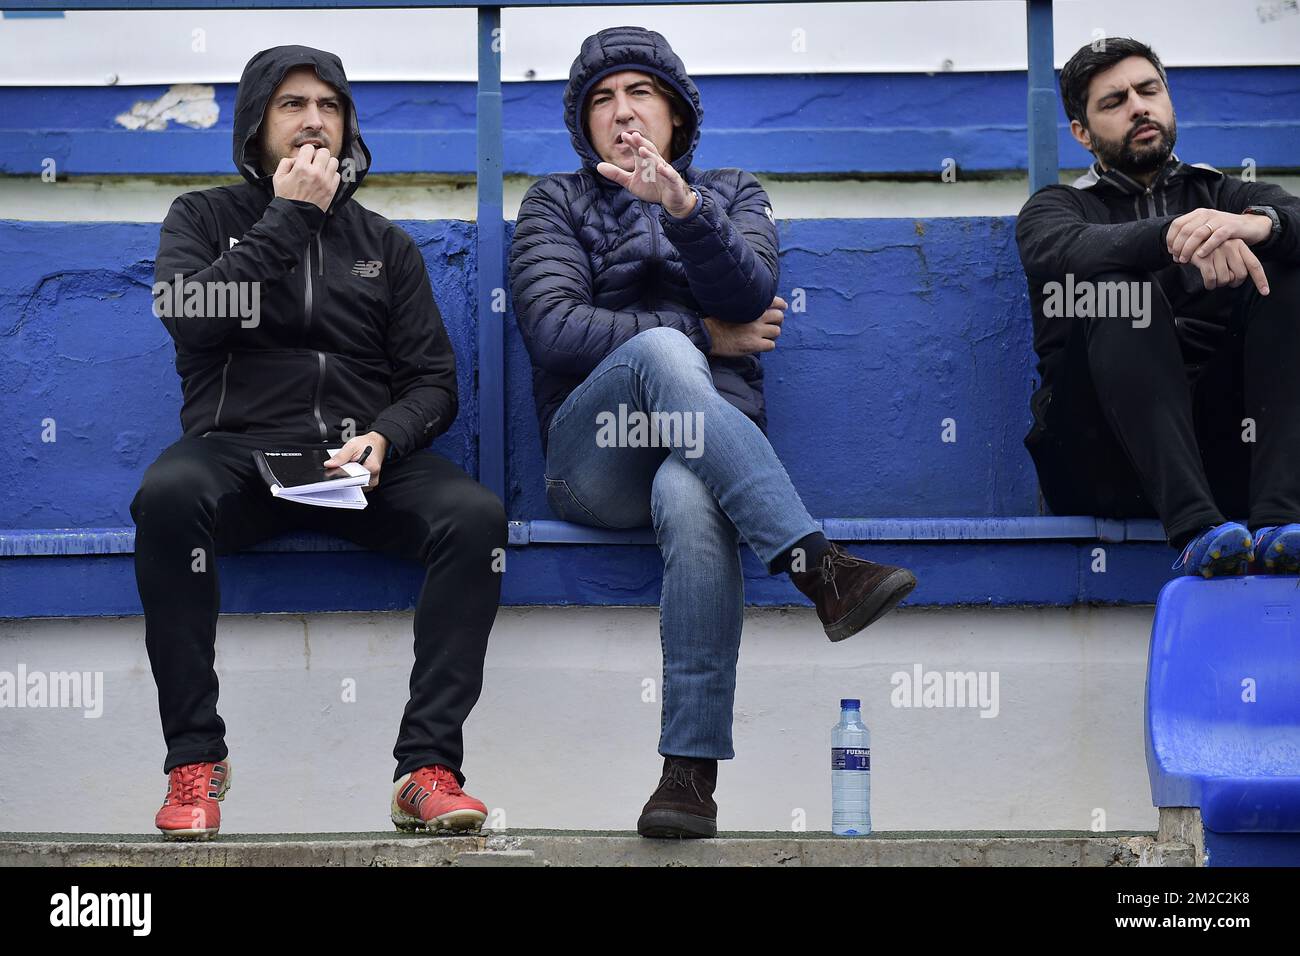 Standard's assistant coach Rui Mota, Standard's head coach Ricardo Sa Pinto and Standard's physical coach Jose Guilherme Oliveira Kruss Gomes pictured sitting in the stands during a friendly soccer game between Belgian first division team Standard de Liege and German club Fortuna Dusseldorf on day five of the winter training camp in Marbella, Spain, Tuesday 09 January 2018. BELGA PHOTO YORICK JANSENS Stock Photo